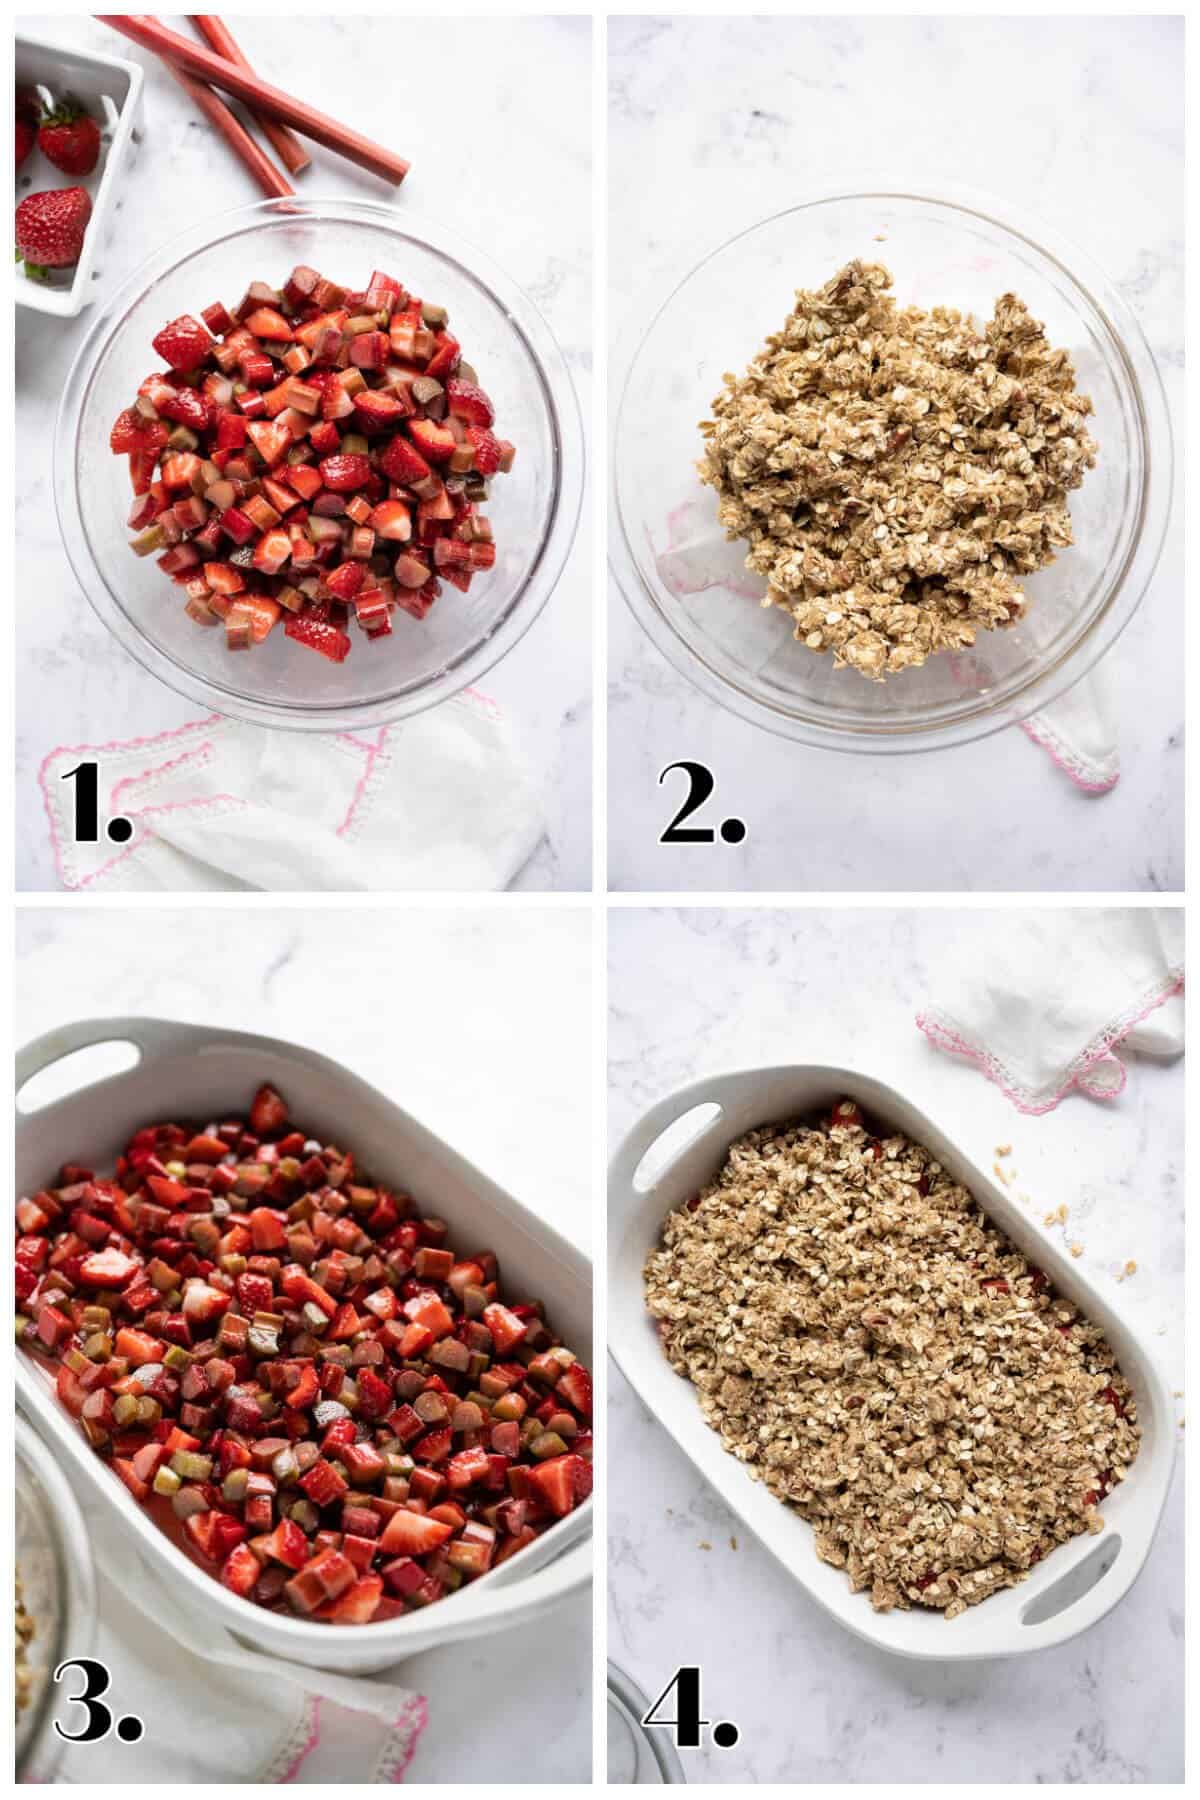 Collage showing steps to make rhubarb strawberry crisp. 1- make filling; 2- make topping; 3- put filling in 9x13 dish; 4- add topping.